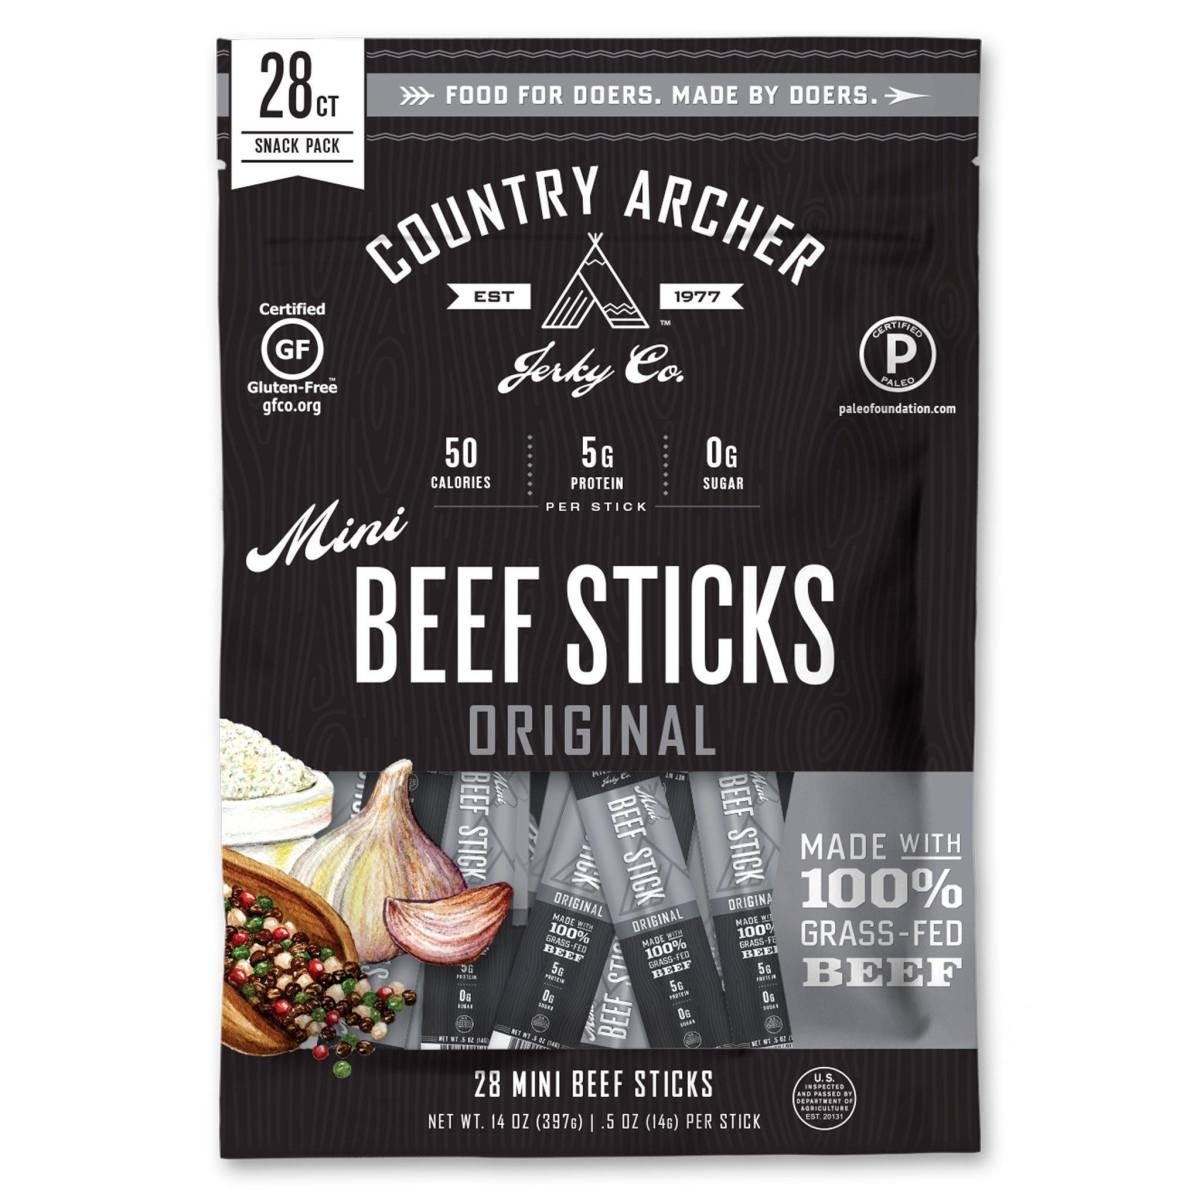 Review of Country Archer Beef Sticks